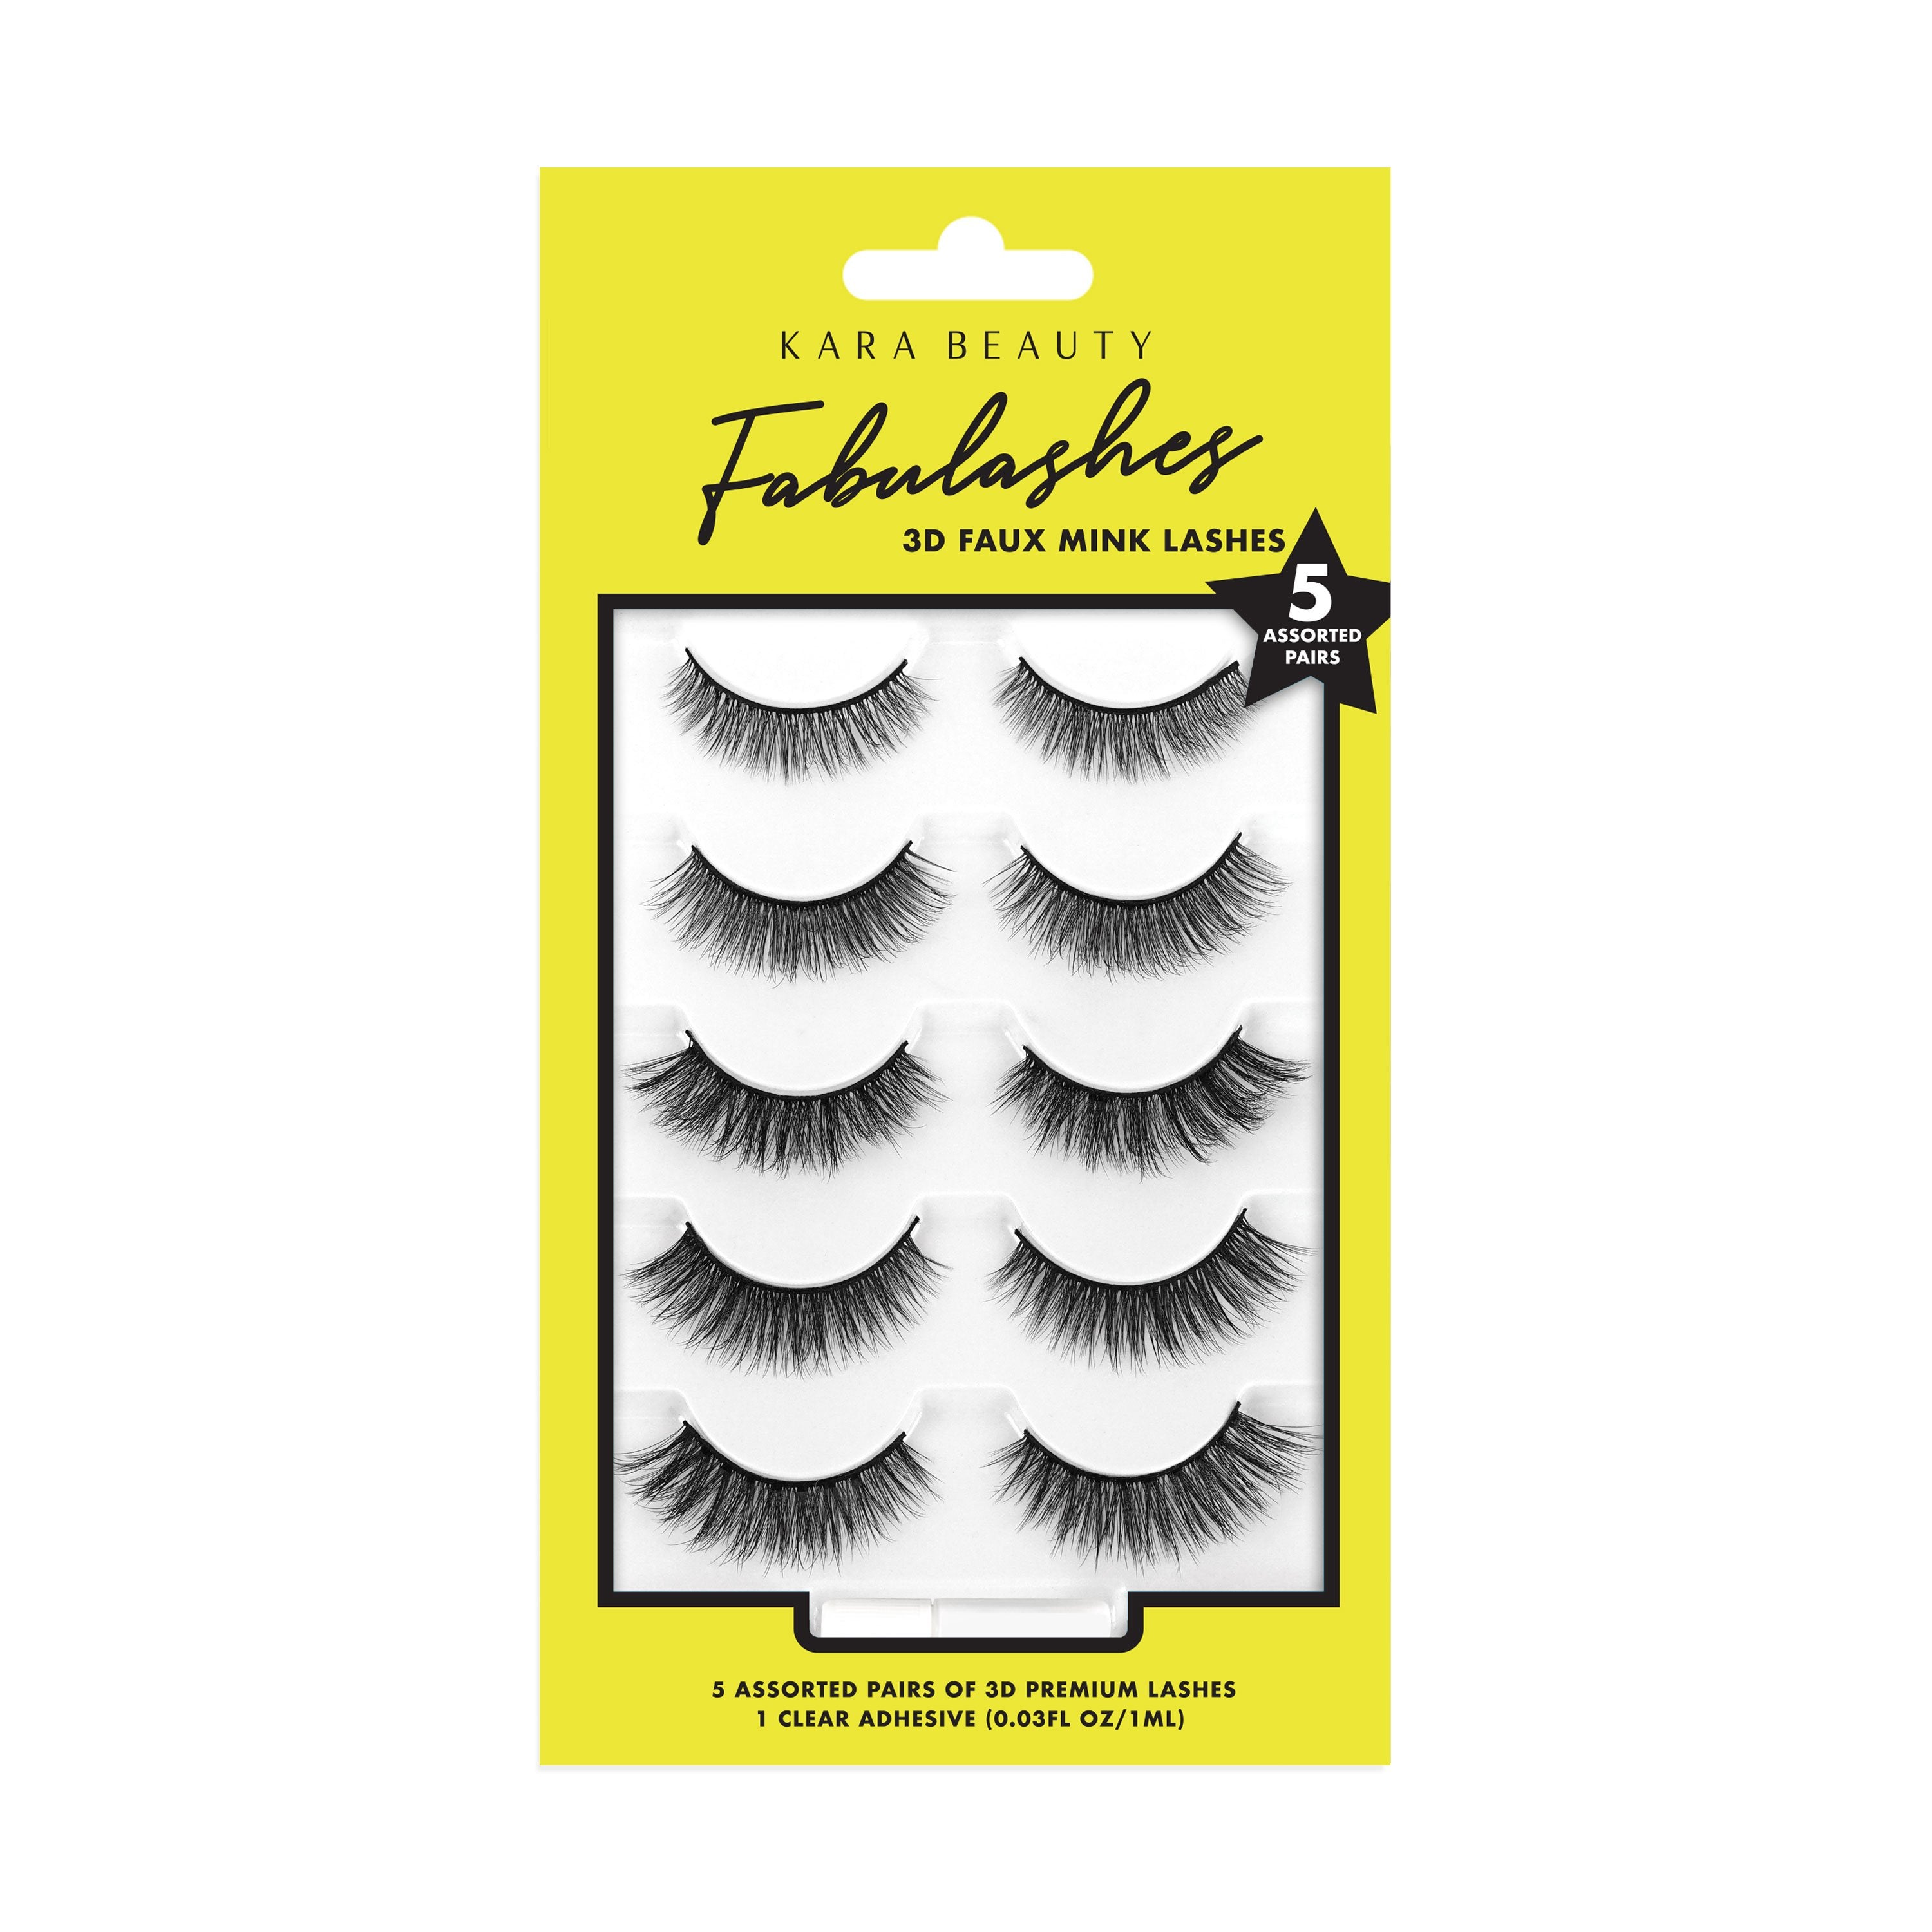 3D faux mink eyelashes assorted 5 pair multi-pack